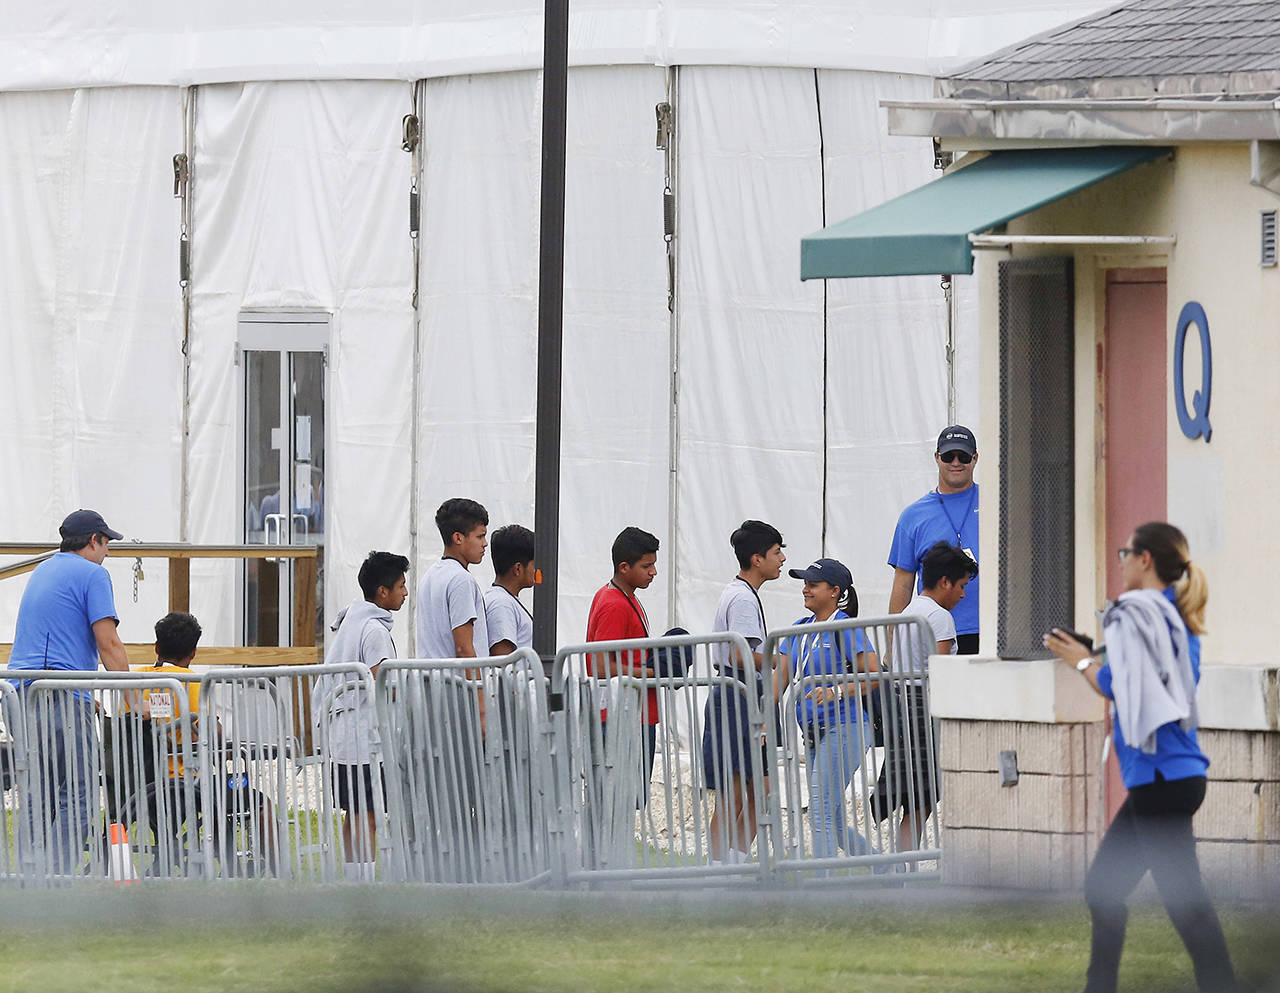 In this June 20 photo, immigrant children walk in a line outside the Homestead Temporary Shelter for Unaccompanied Children a former Job Corps site that now houses them in Homestead, Florida. (AP Photo/Brynn Anderson, File)